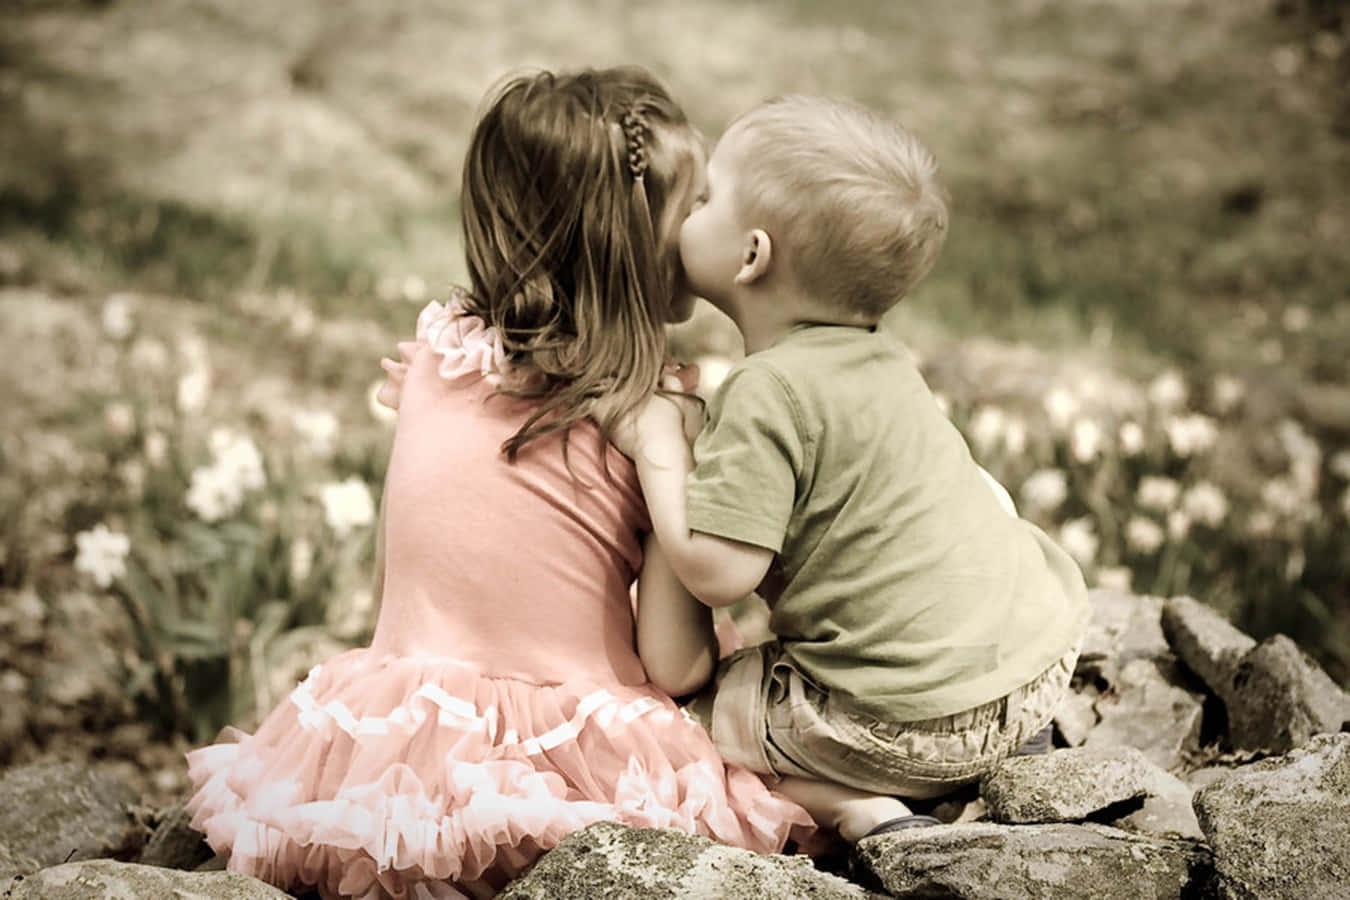 Download Cute Baby Couple Kissing In The Garden Wallpaper ...